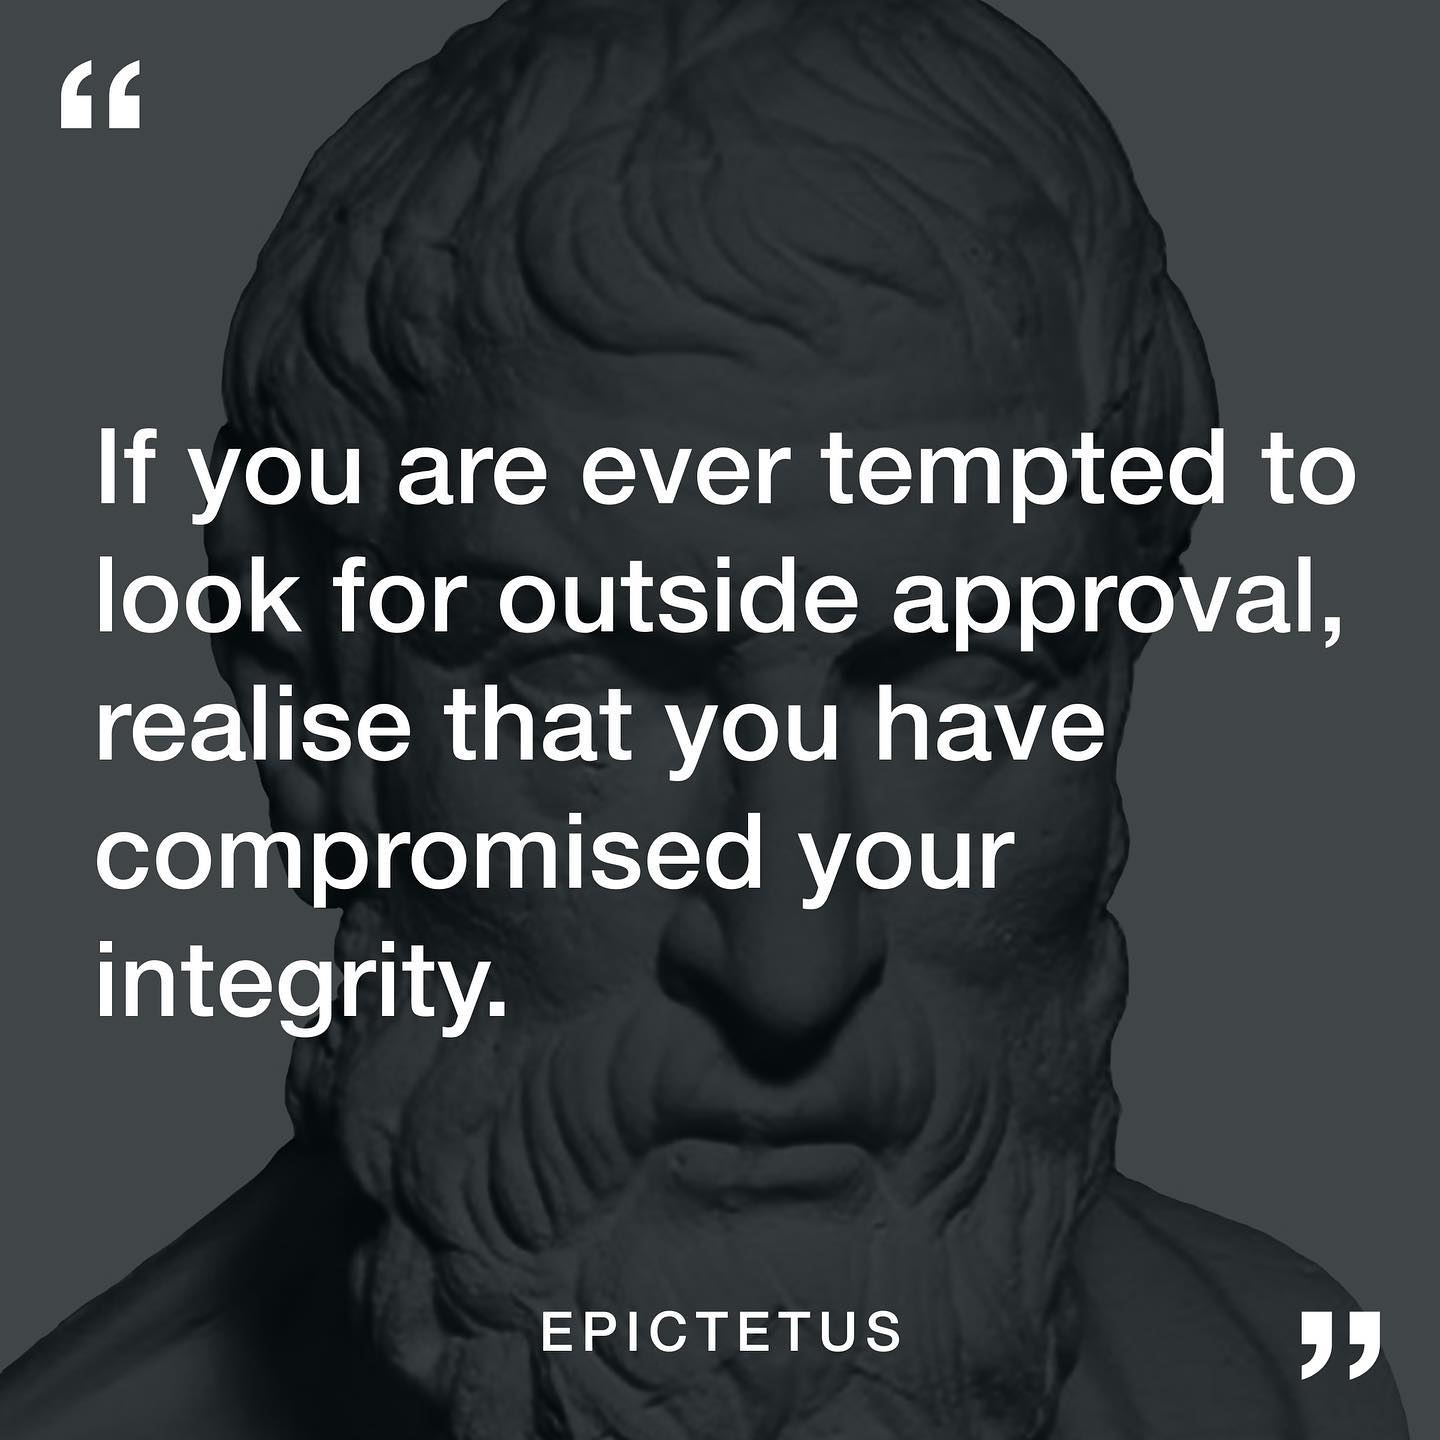 If you are ever tempted to look for outside approval. Realize that you have compromised your integrity.